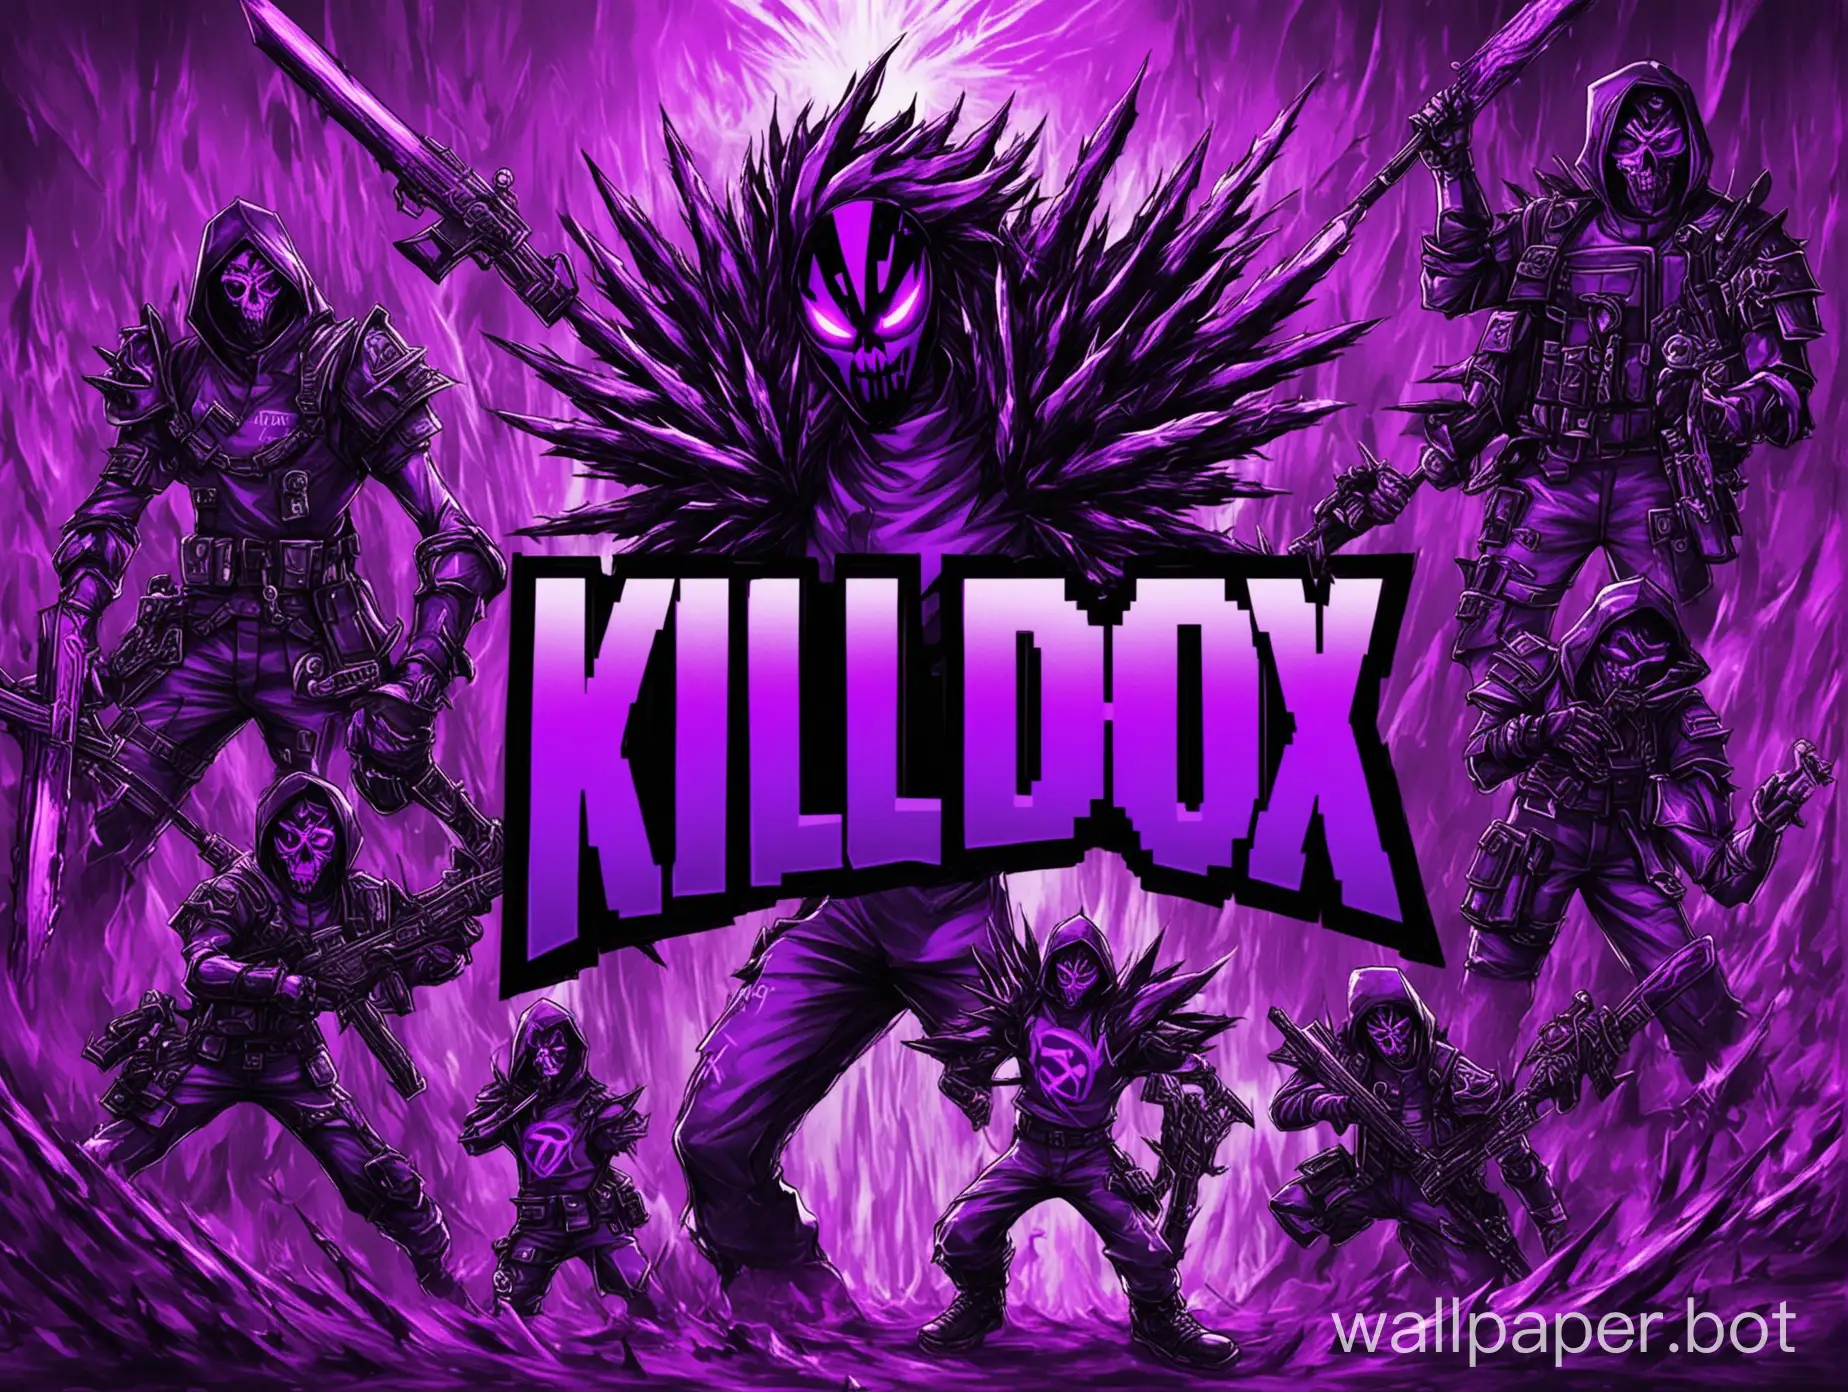 the colors are Purple and Black. Behind Nick is a character. In the center is the nickname kill.dox.
